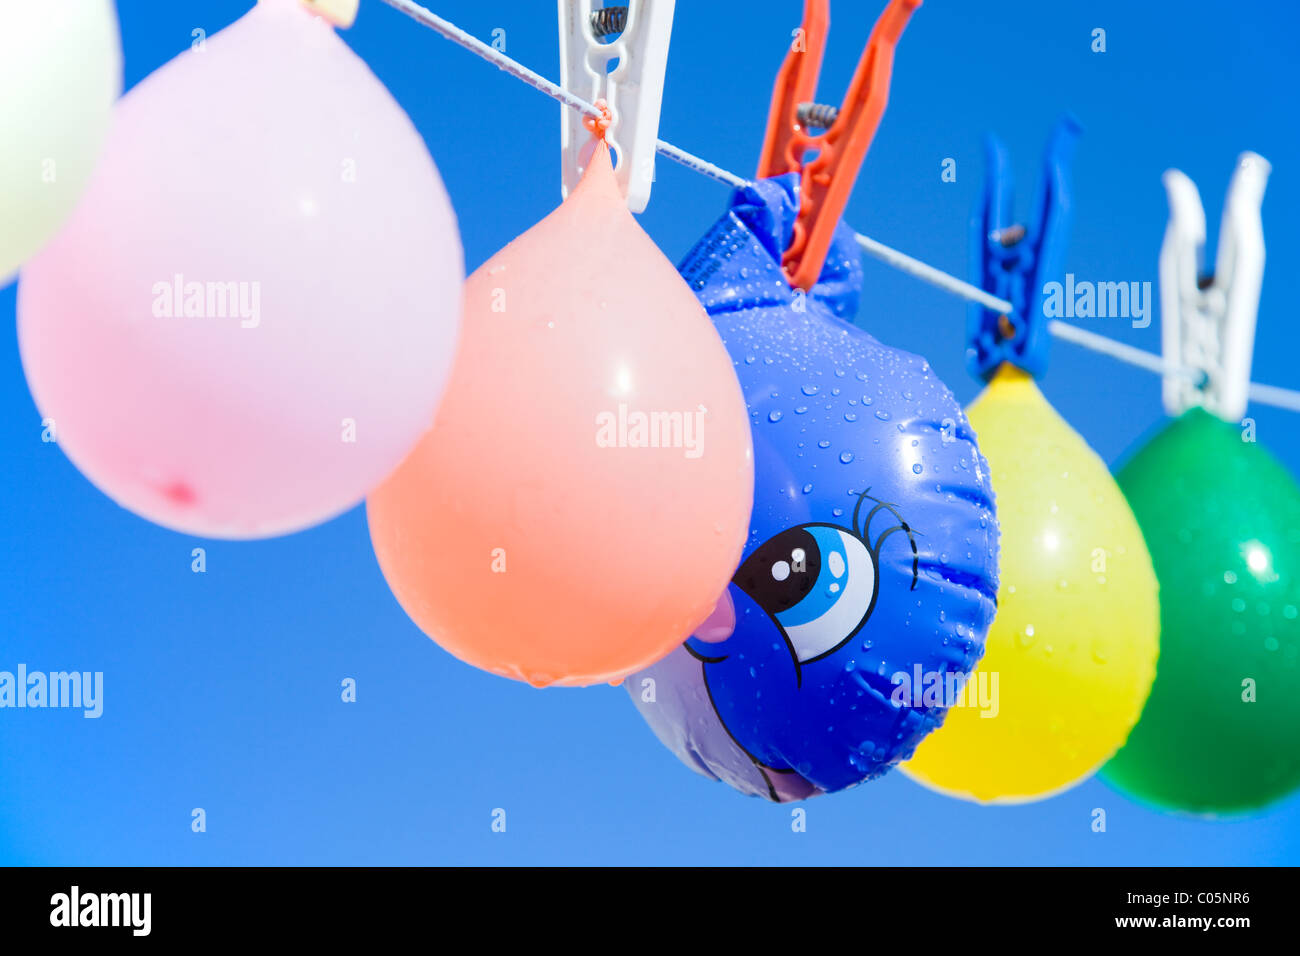 Toy fish hidden between balloons hanging from a clothesline Stock Photo